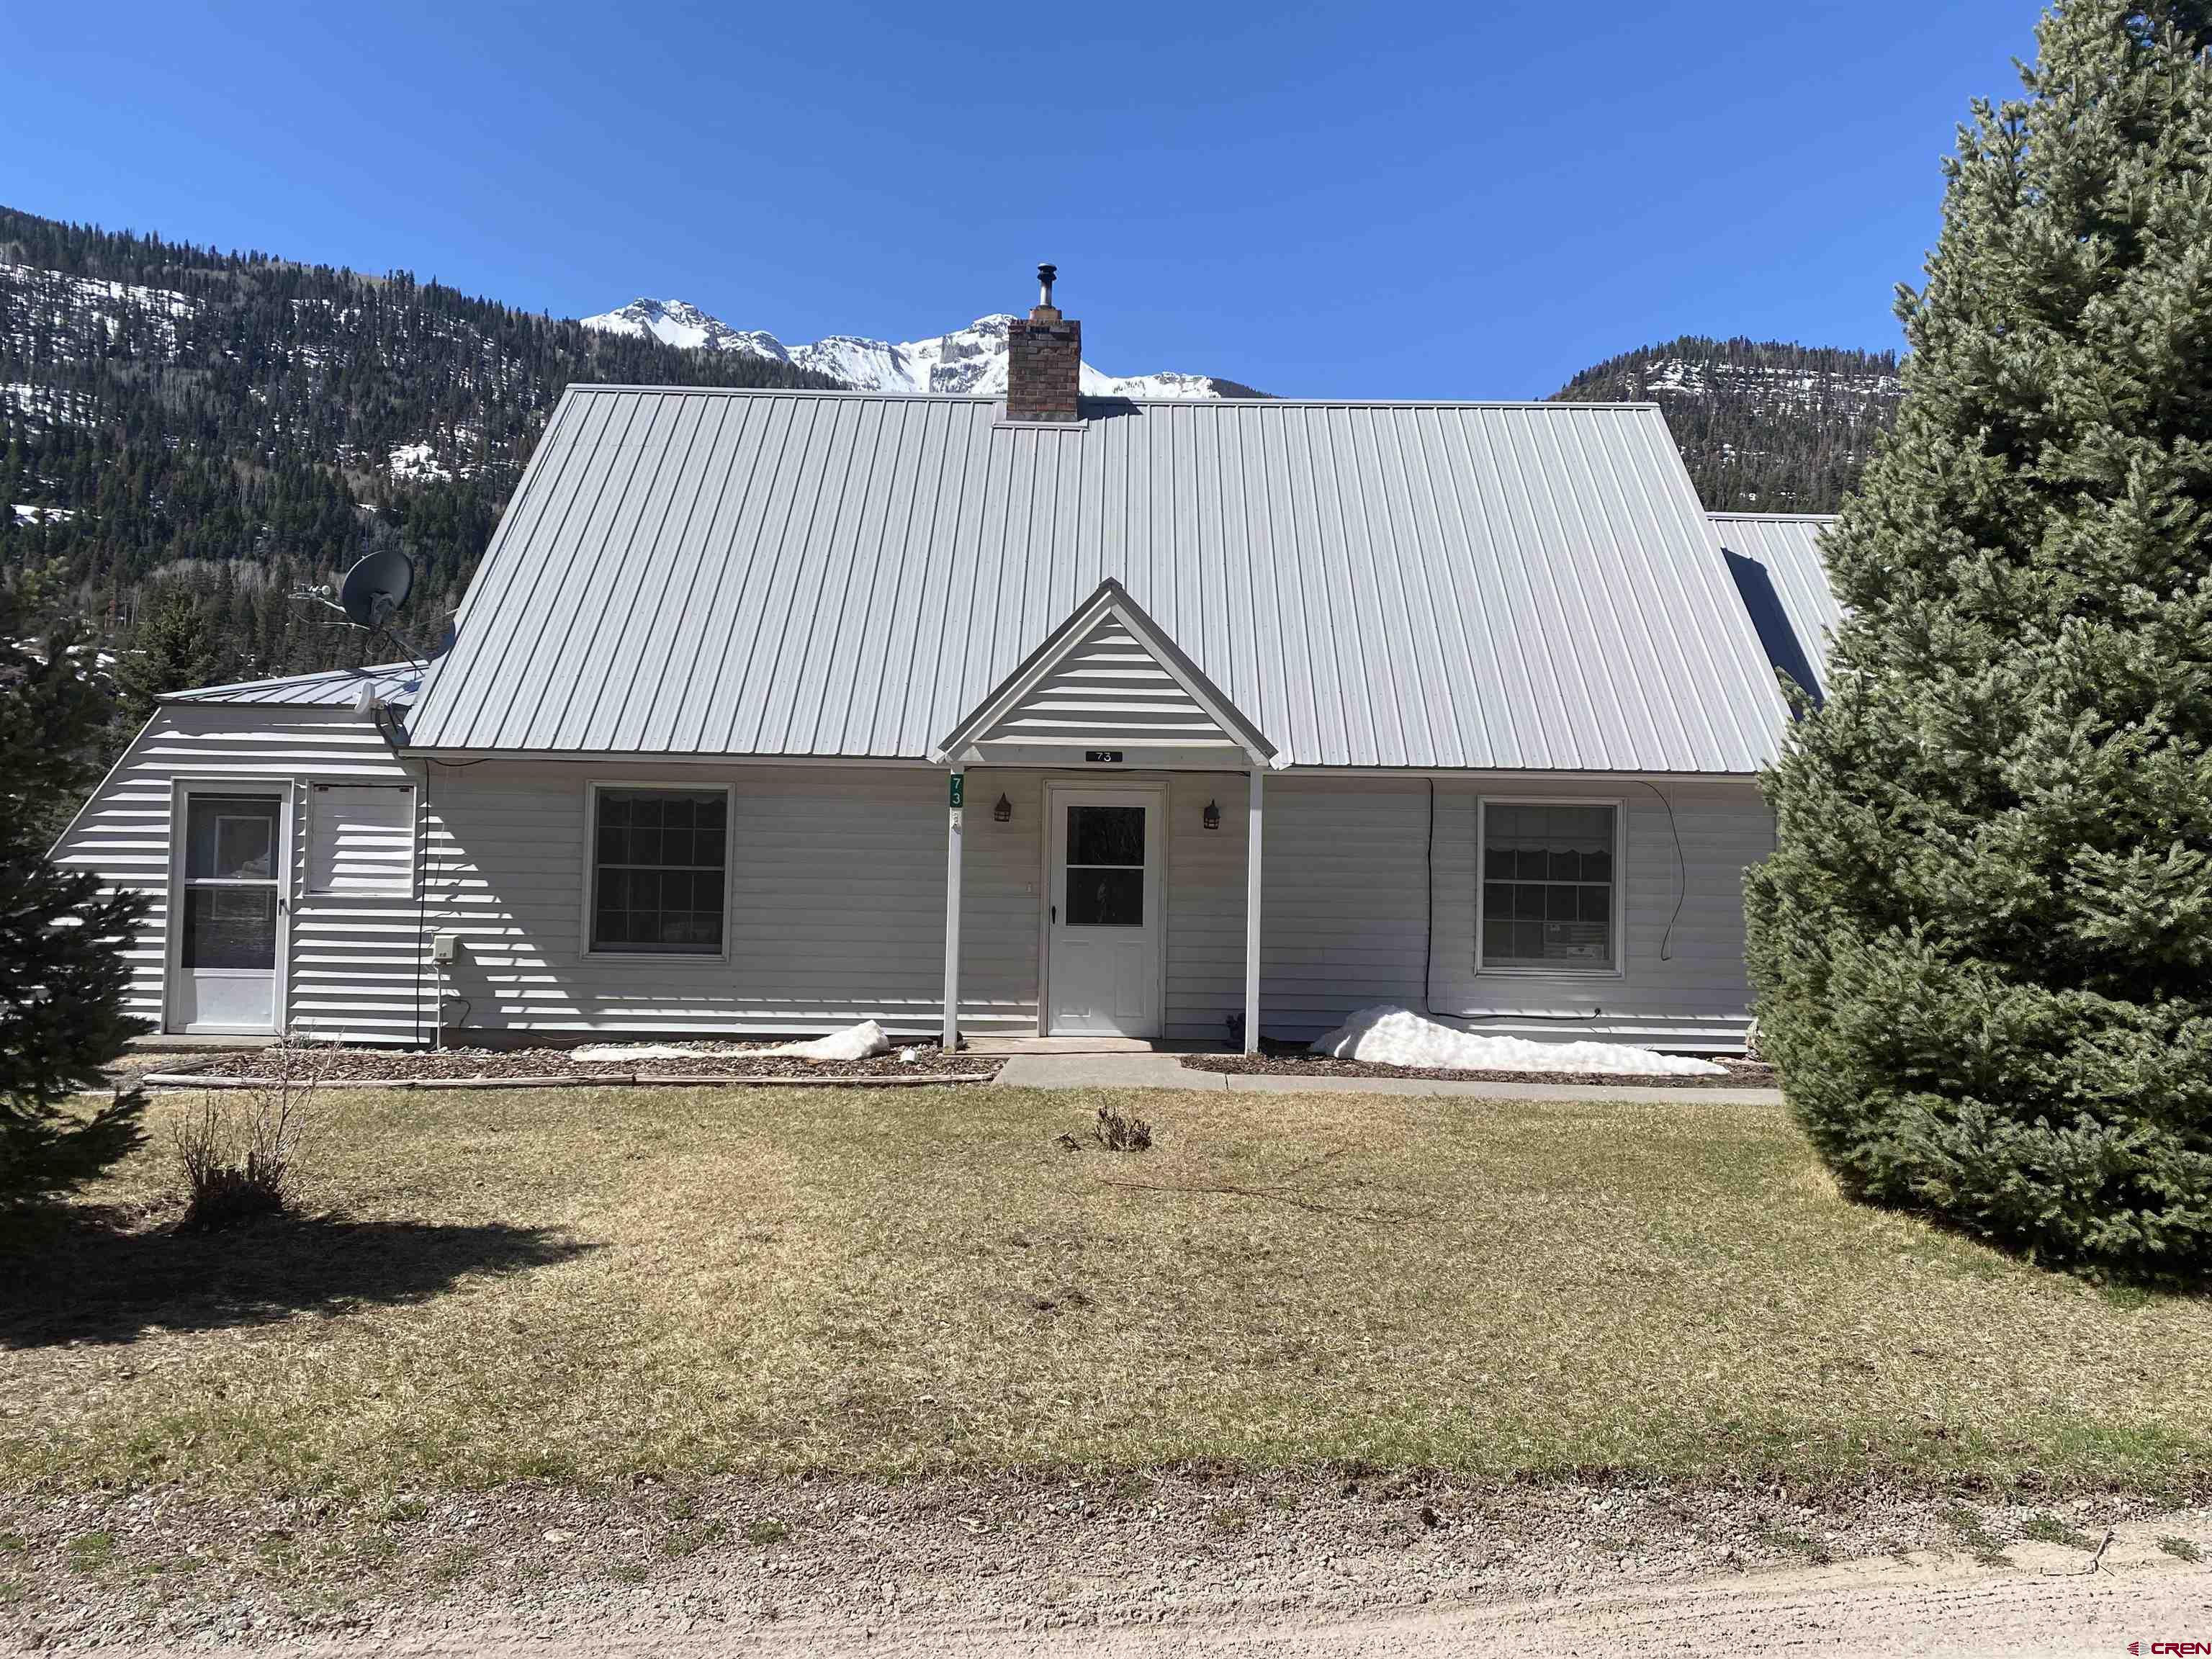 ***Property is back on the market to no fault of the Seller - Buyer was unable to perform*** This 3 bedroom 2 bathroom home is within the city limits of Ouray City, with unbeatable views of the mountains and Ouray.  When walking through the home, the main level consists of the kitchen, living, laundry, 3/4 bathroom and 1 bedroom, with a mudroom servicing the garage and back porch. The kitchen boasts a gorgeous red brick wall giving the space a unique accent.  There is also a spacious sunroom, perfect for creating a special nook amongst the plants.  Heading upstairs there are 2 bedrooms with great views of the mountains and 1 bathroom in the hallway. There is an attic that has an abundance of storage space, which is accessed through one of the upstairs bedrooms. There also is an additional non-heated room off of the mudroom, which could be used for all sorts of storage.  The yard is a great place to sit on the back deck and enjoy the crisp mountain air and views of Corbett Peak.  Make this home yours and enjoy the fireworks during the 4th of July and New Years celebrations!